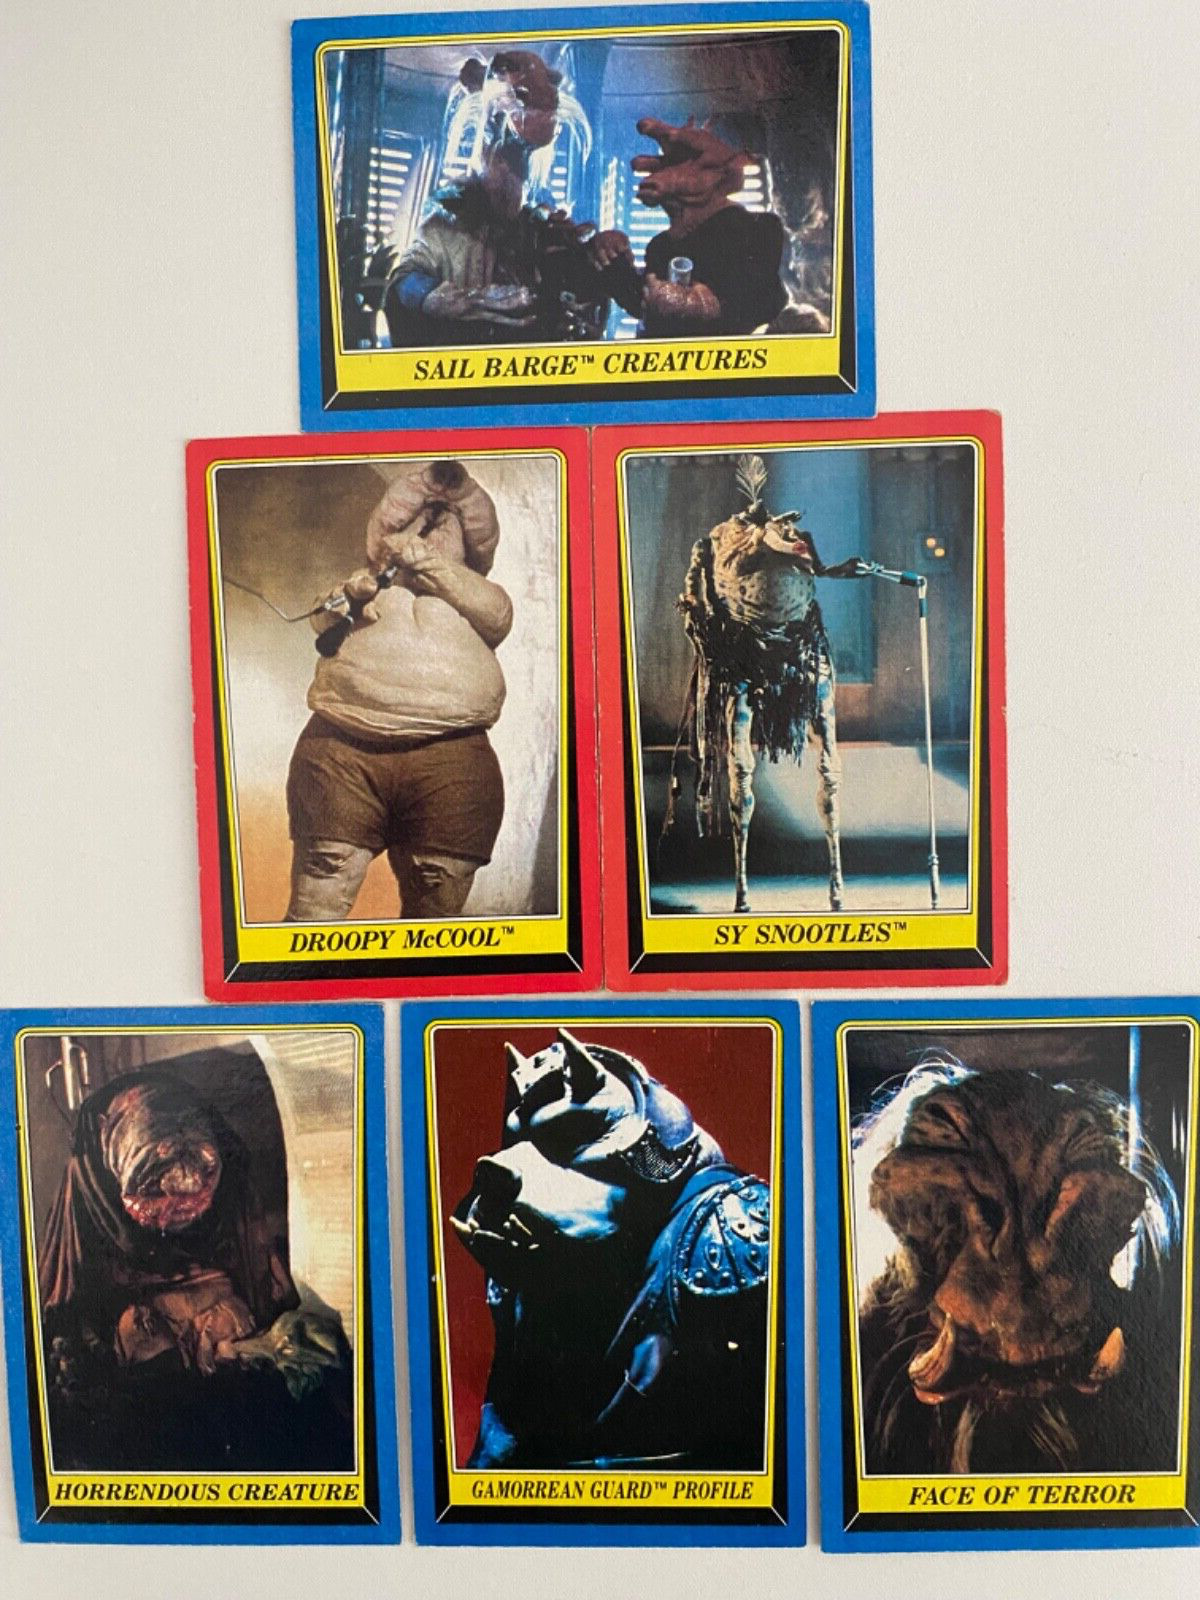 1983 Topps Star Wars Return of the Jedi Cards - Lot of 6. All aliens